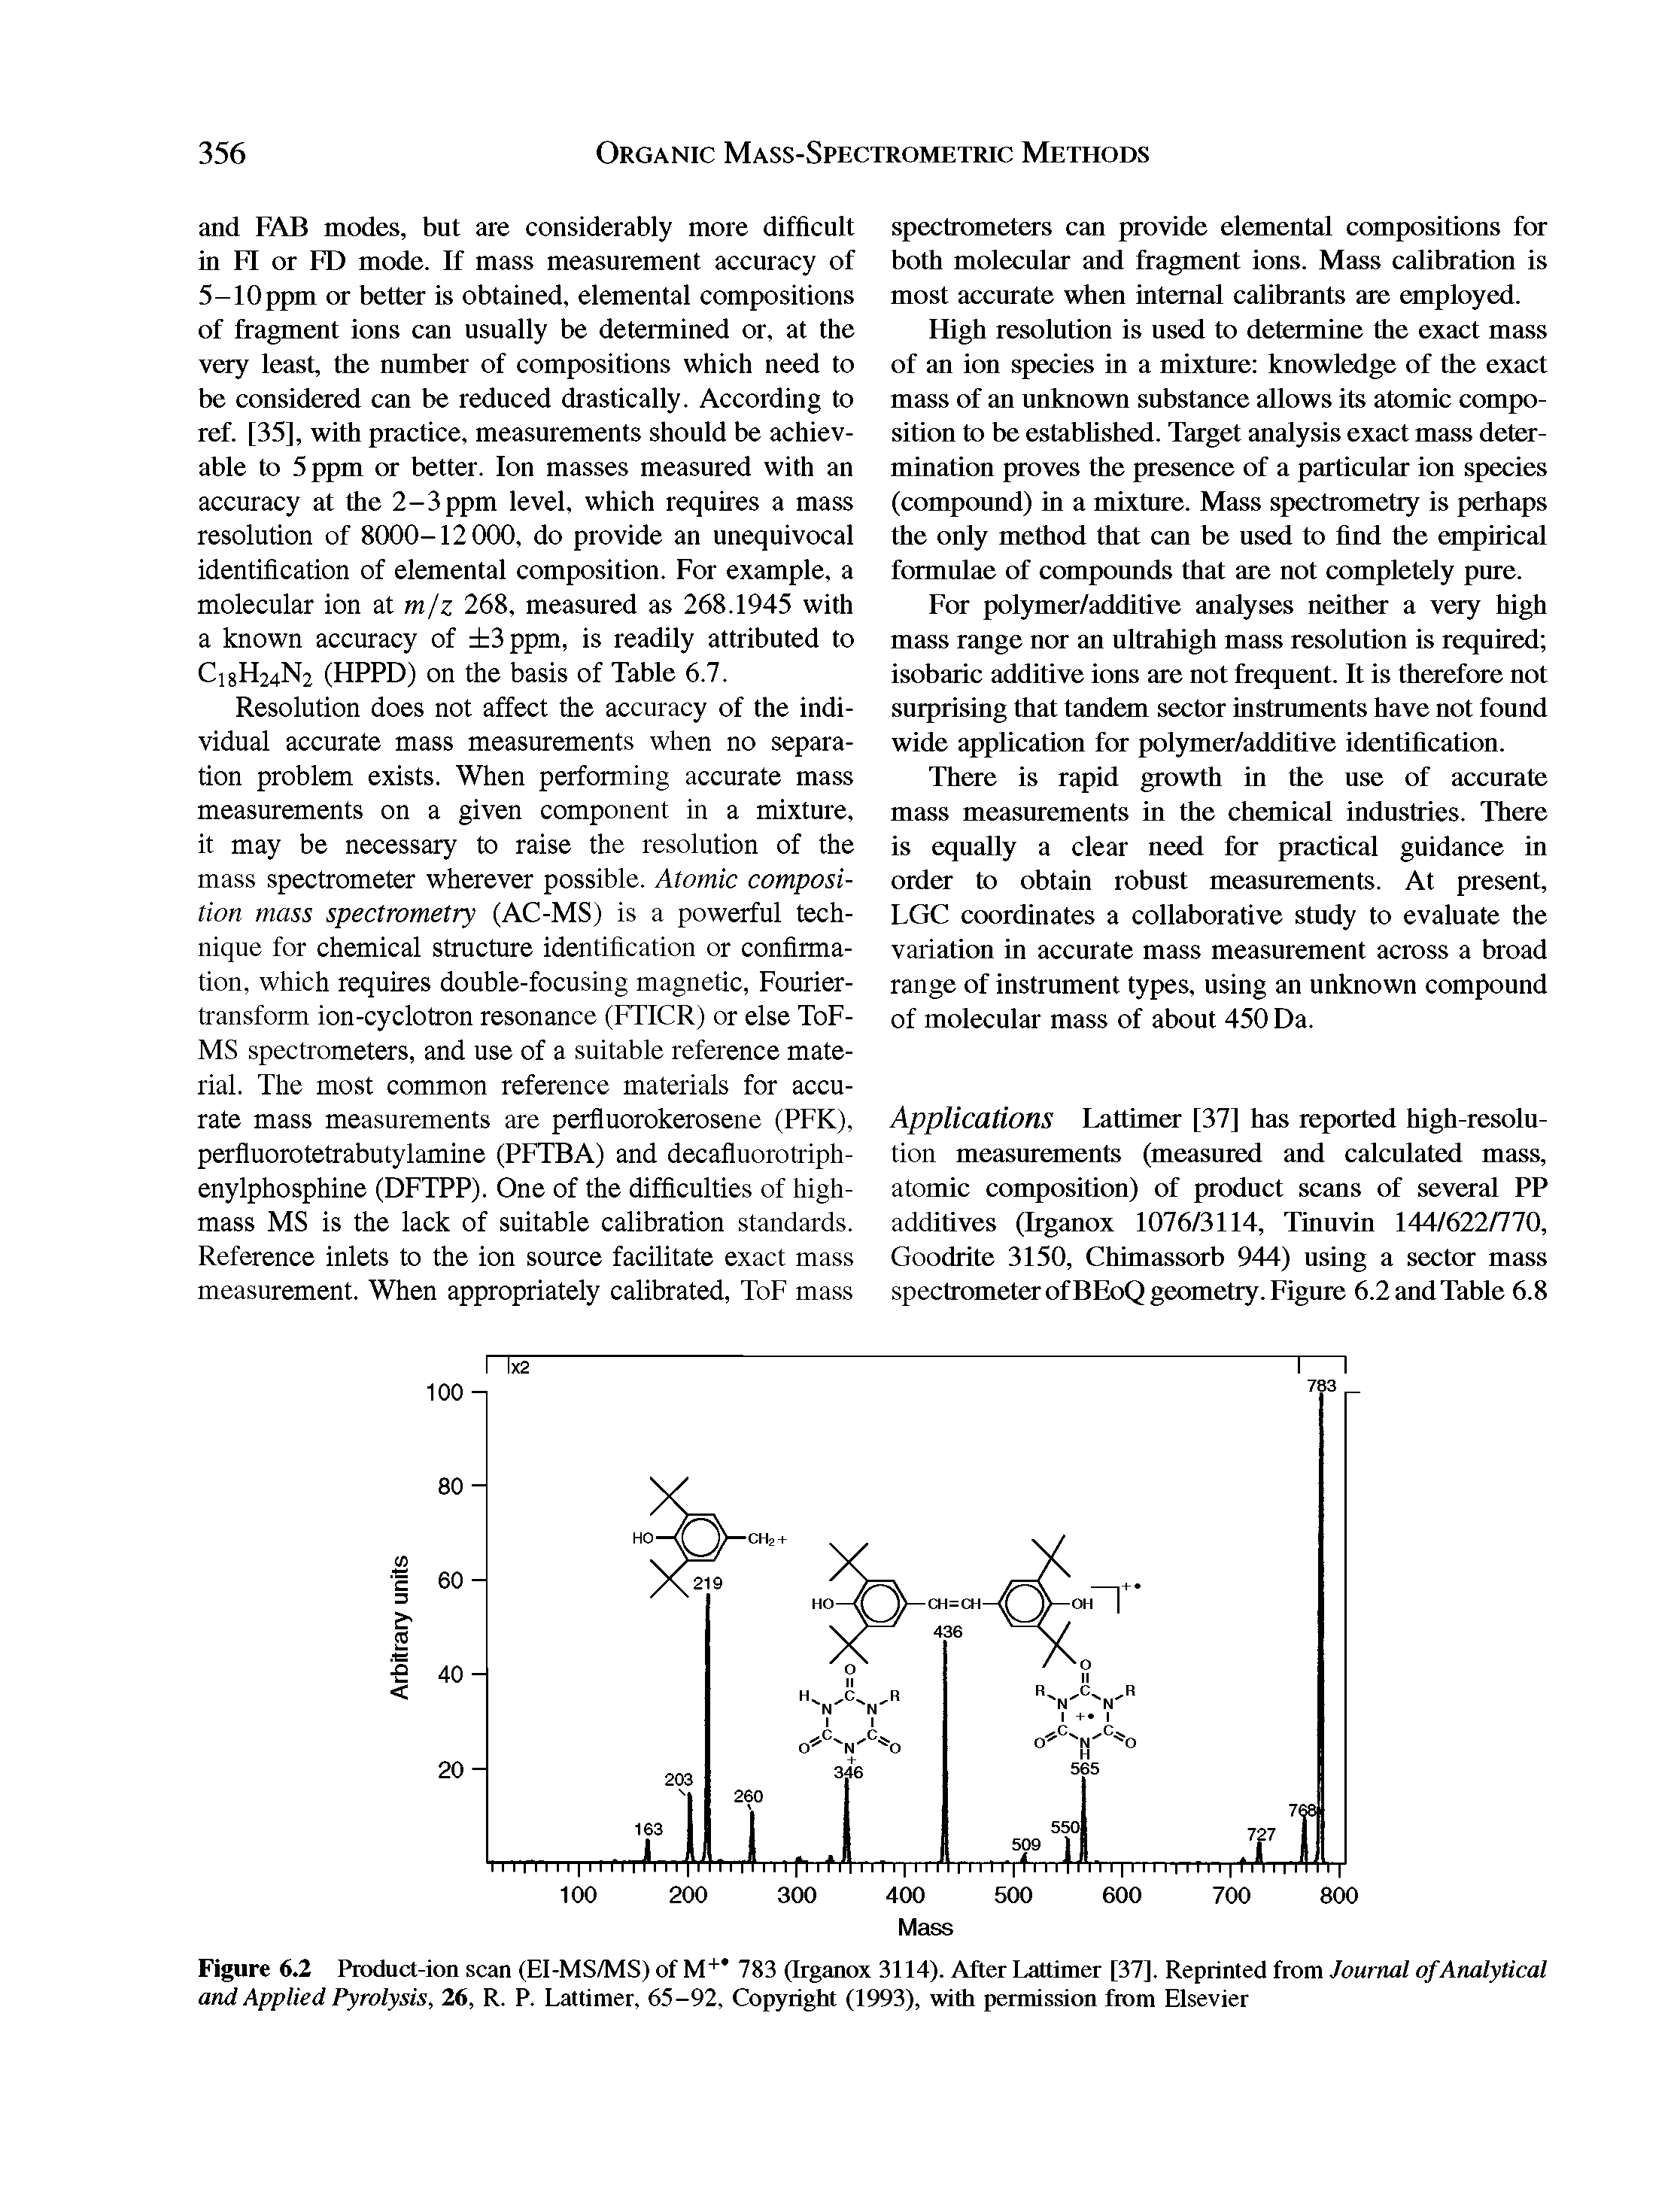 Figure 6.2 Product-ion scan (EI-MS/MS) of M+ 783 (Irganox 3114). After Lattimer [37], Reprinted from Journal of Analytical and Applied Pyrolysis, 26, R. P. Lattimer, 65-92, Copyright (1993), with permission from Elsevier...